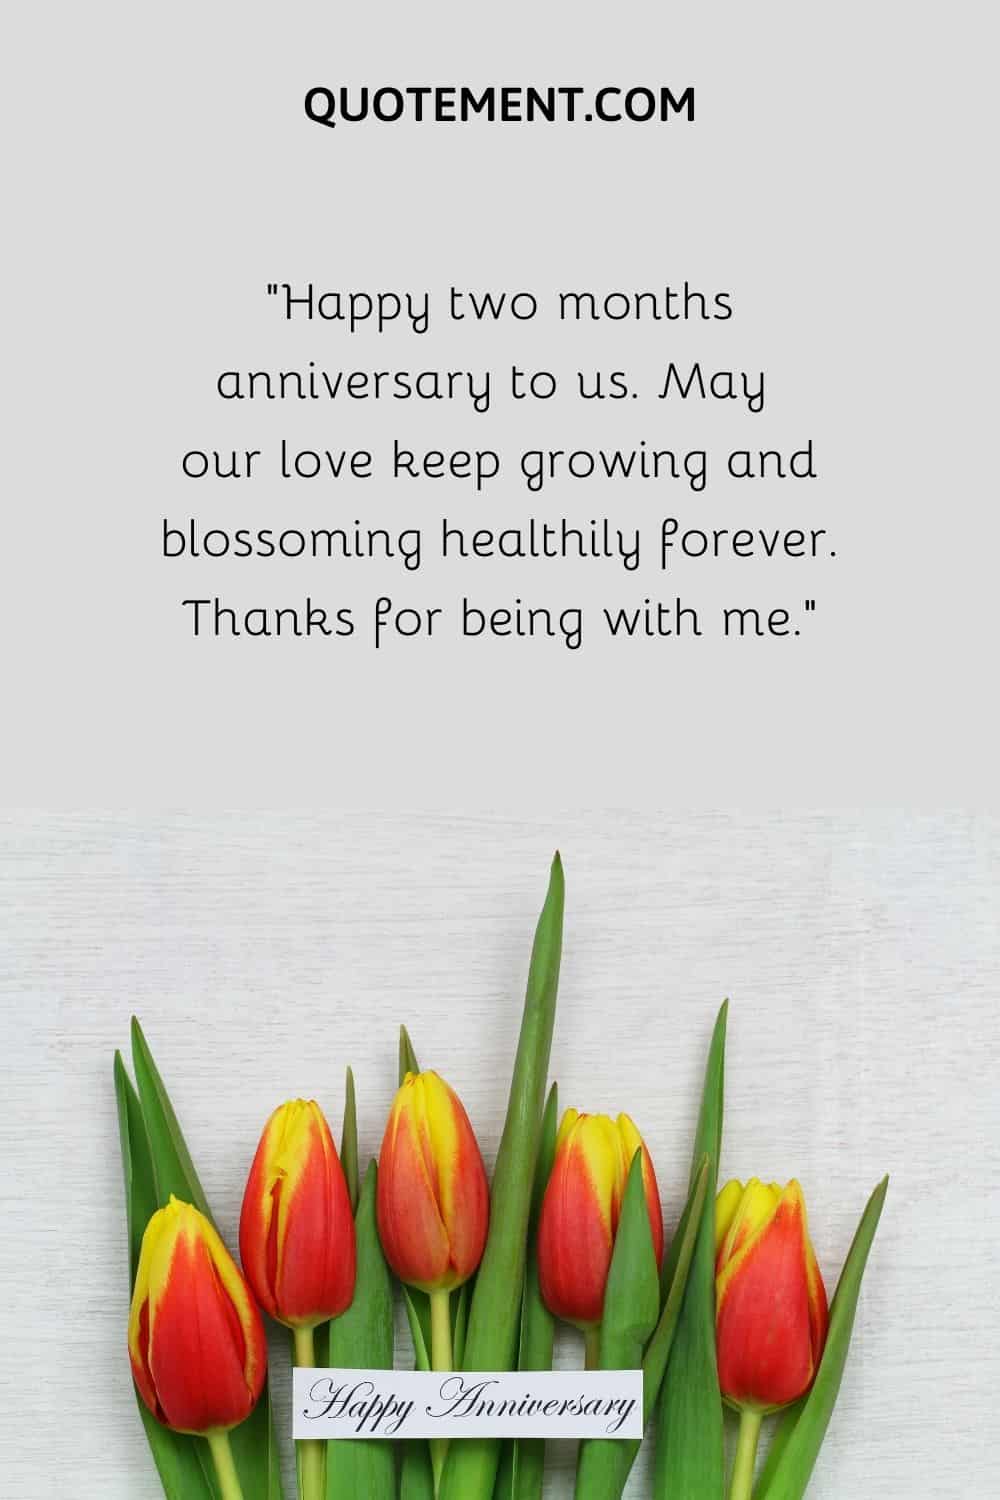 “Happy two months anniversary to us. May our love keep growing and blossoming healthily forever. Thanks for being with me.”